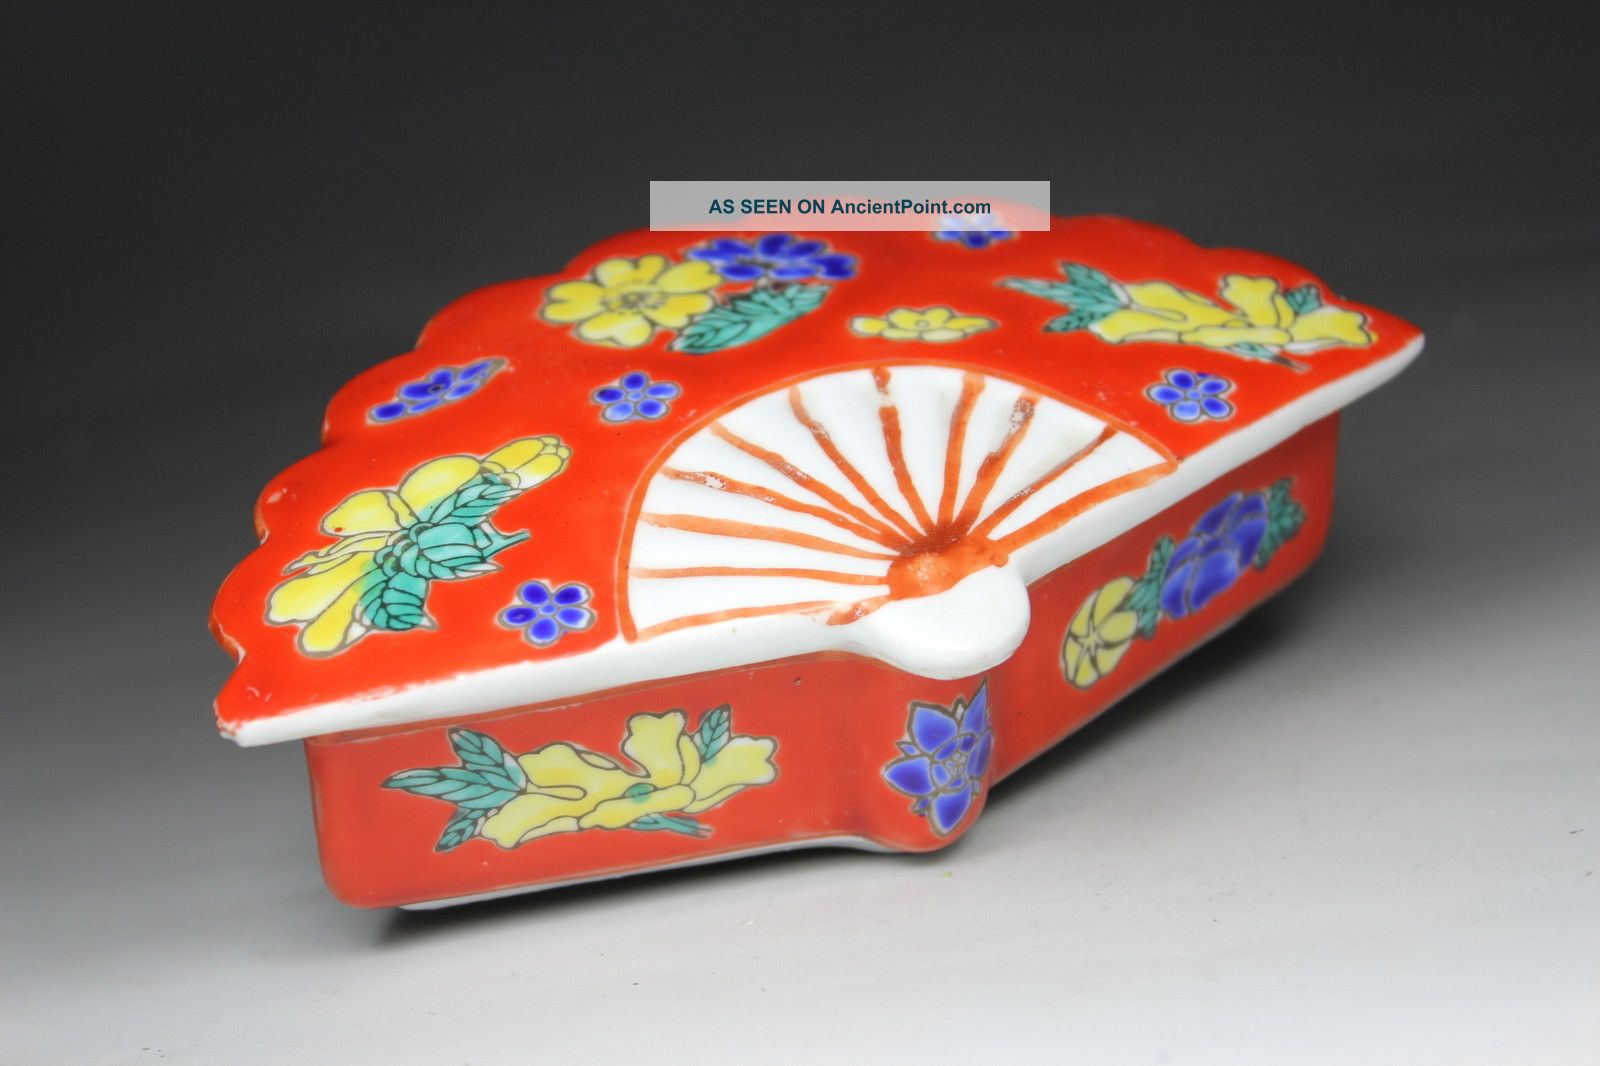 Chinese Handwork Painting Flower Old Porcelain Jewel Box Porcelain photo